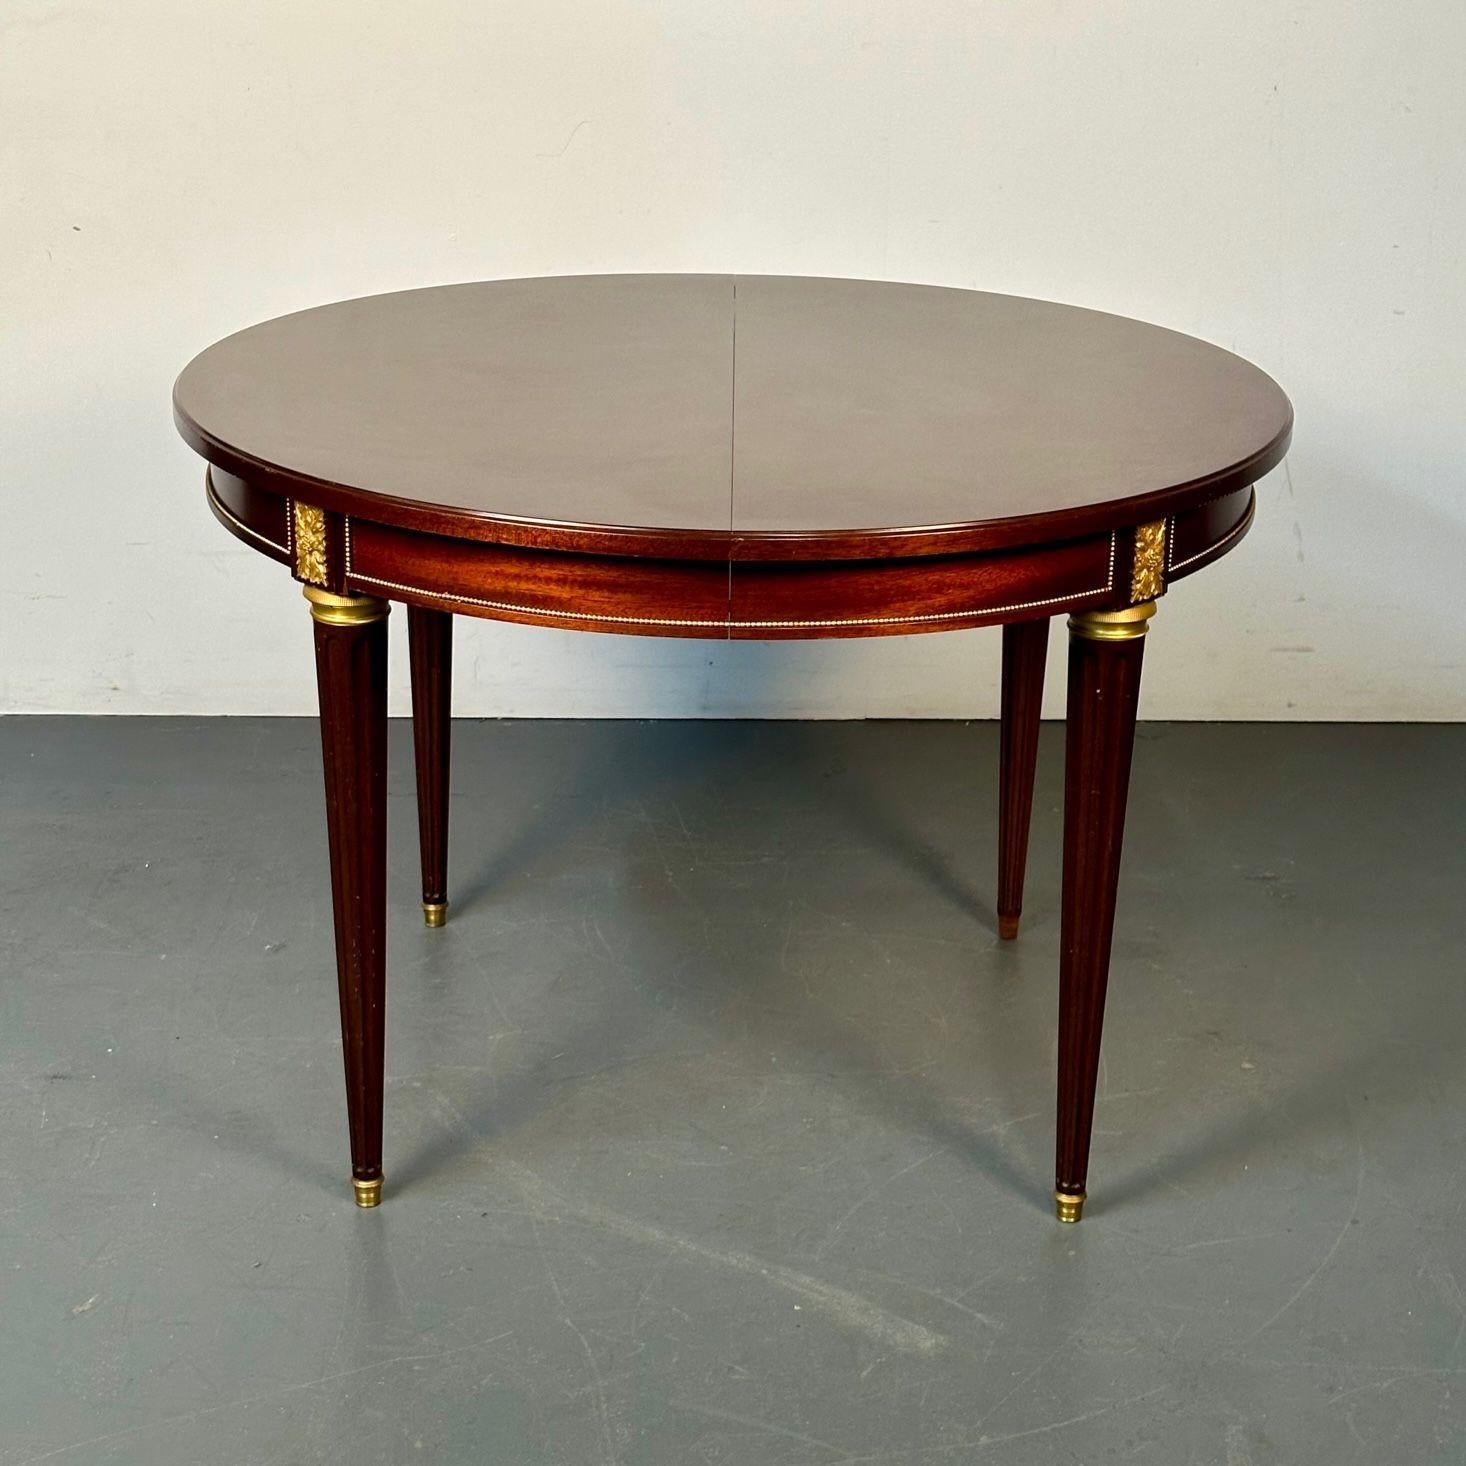 Louis XVI Style Bronze Mounted Center or Dining Table, Plum Pudding Veneer

 
Louis XVI style magnificently bronze mounted plum pudding veneer Centre or Dining Table having three insertable 19.5